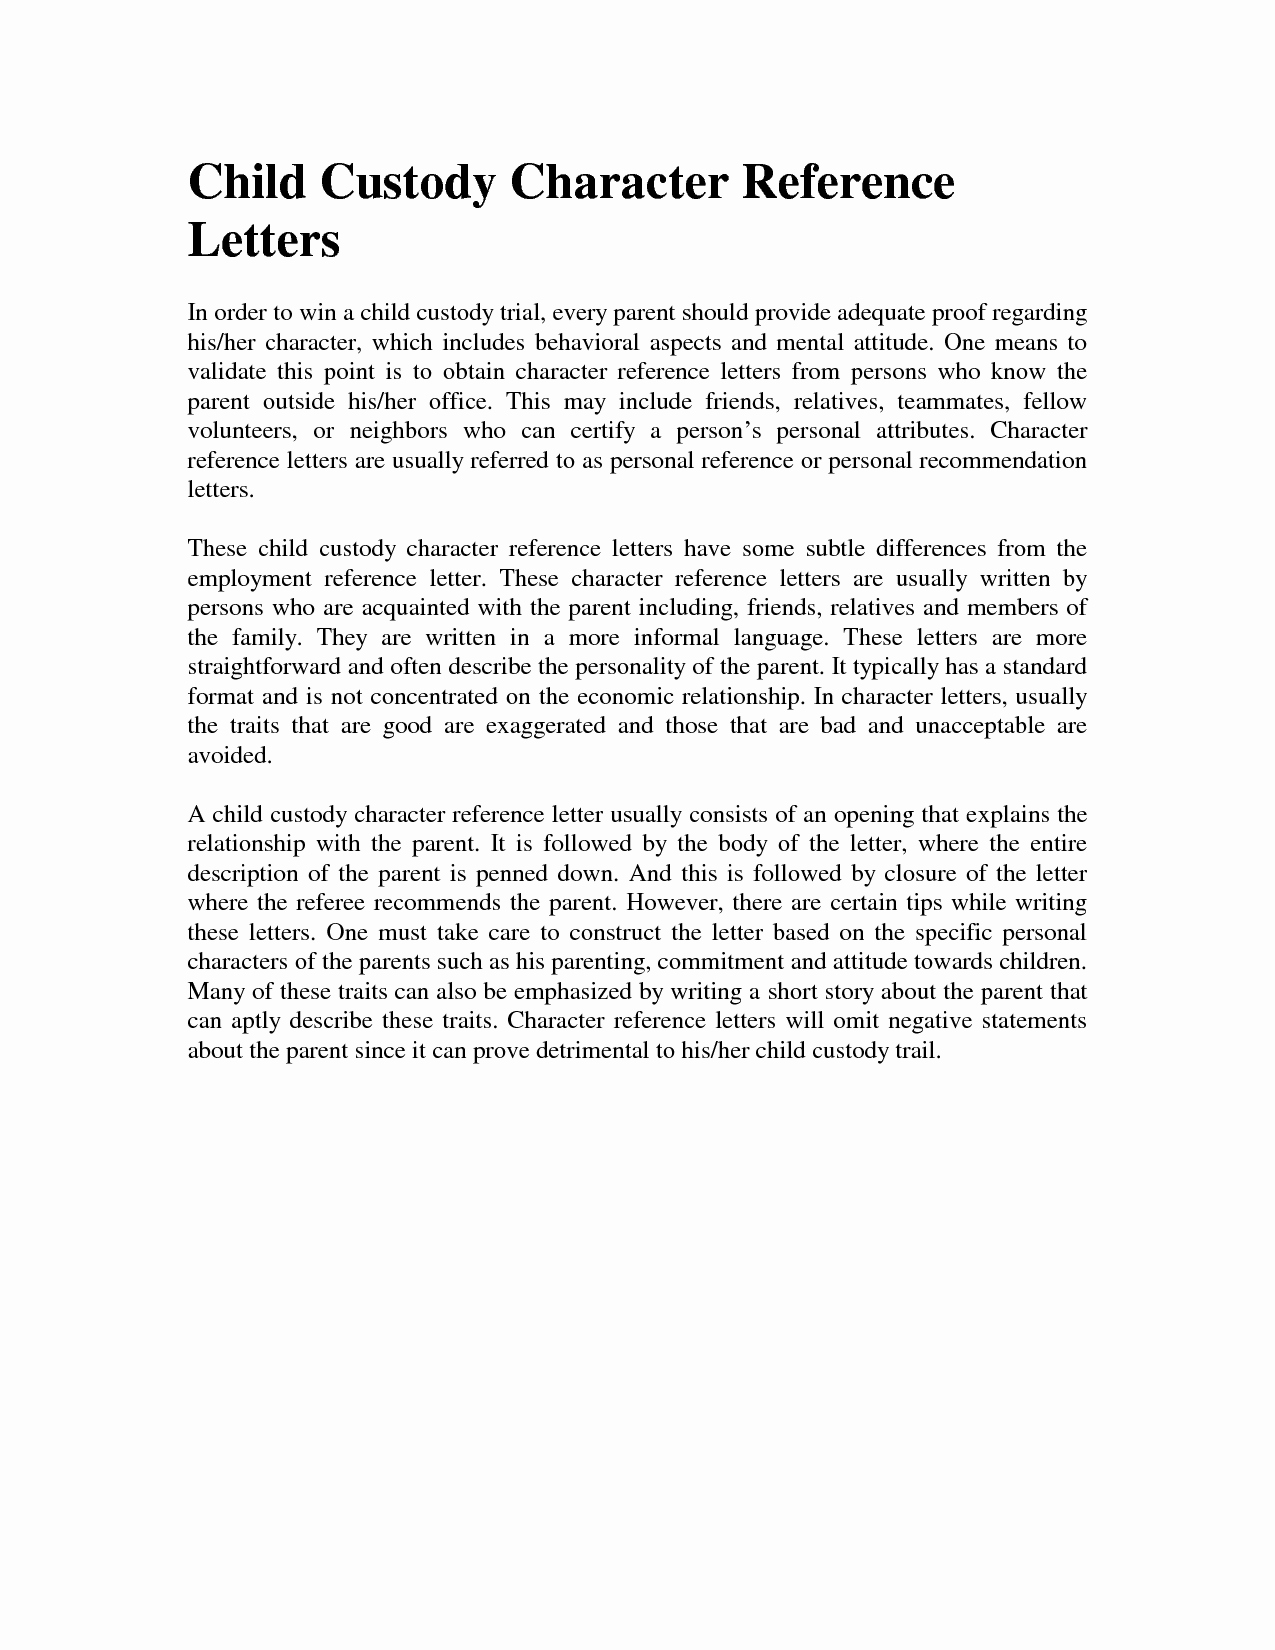 Character Reference Letter Court Child Custody